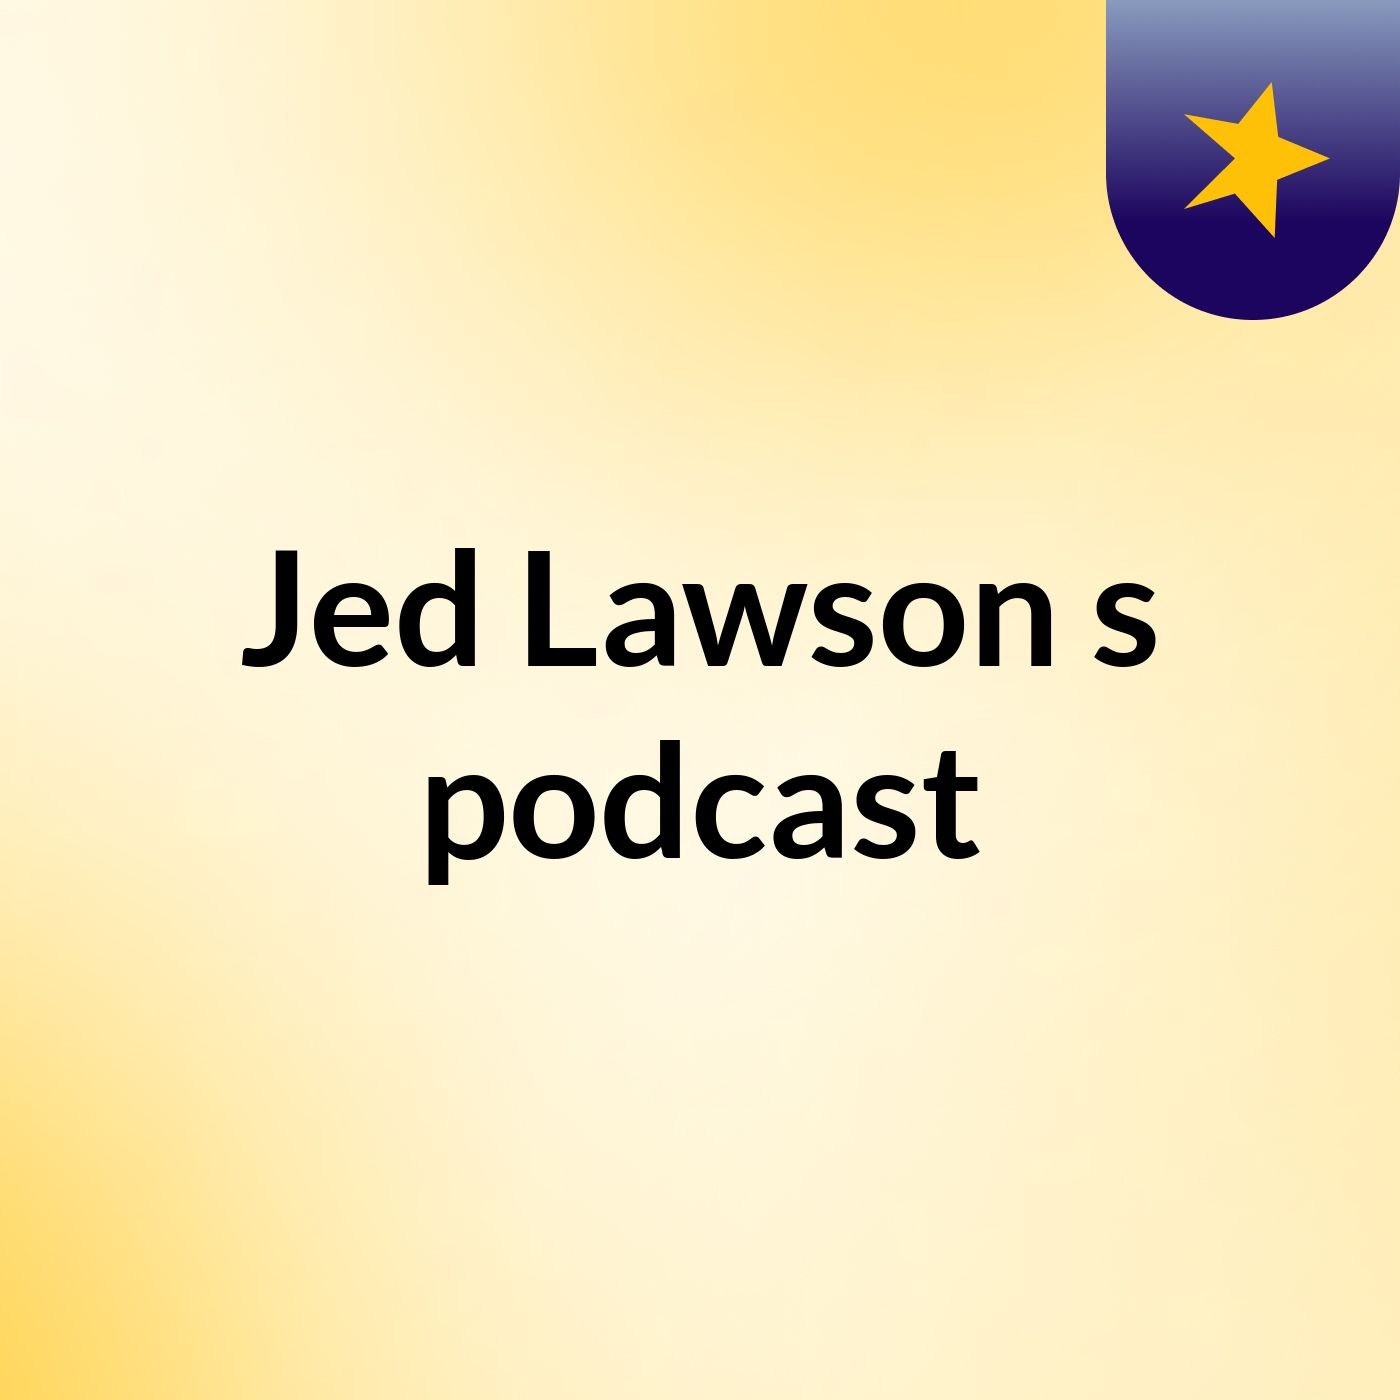 Jed Lawson's podcast